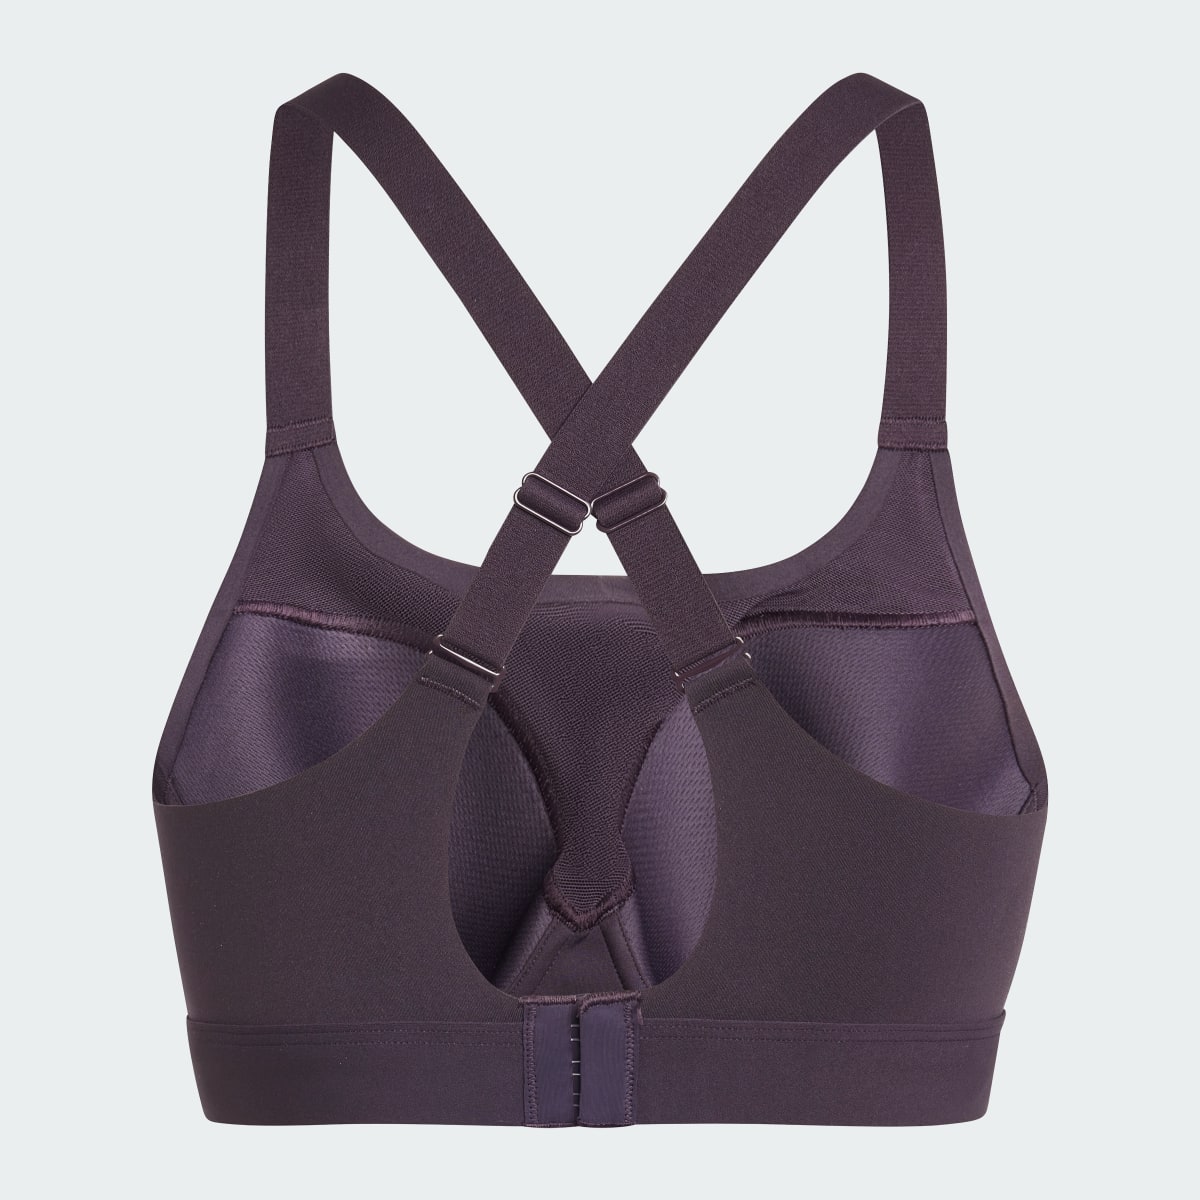 Adidas Brassière de training TLRD Impact Luxe Maintien fort. 5